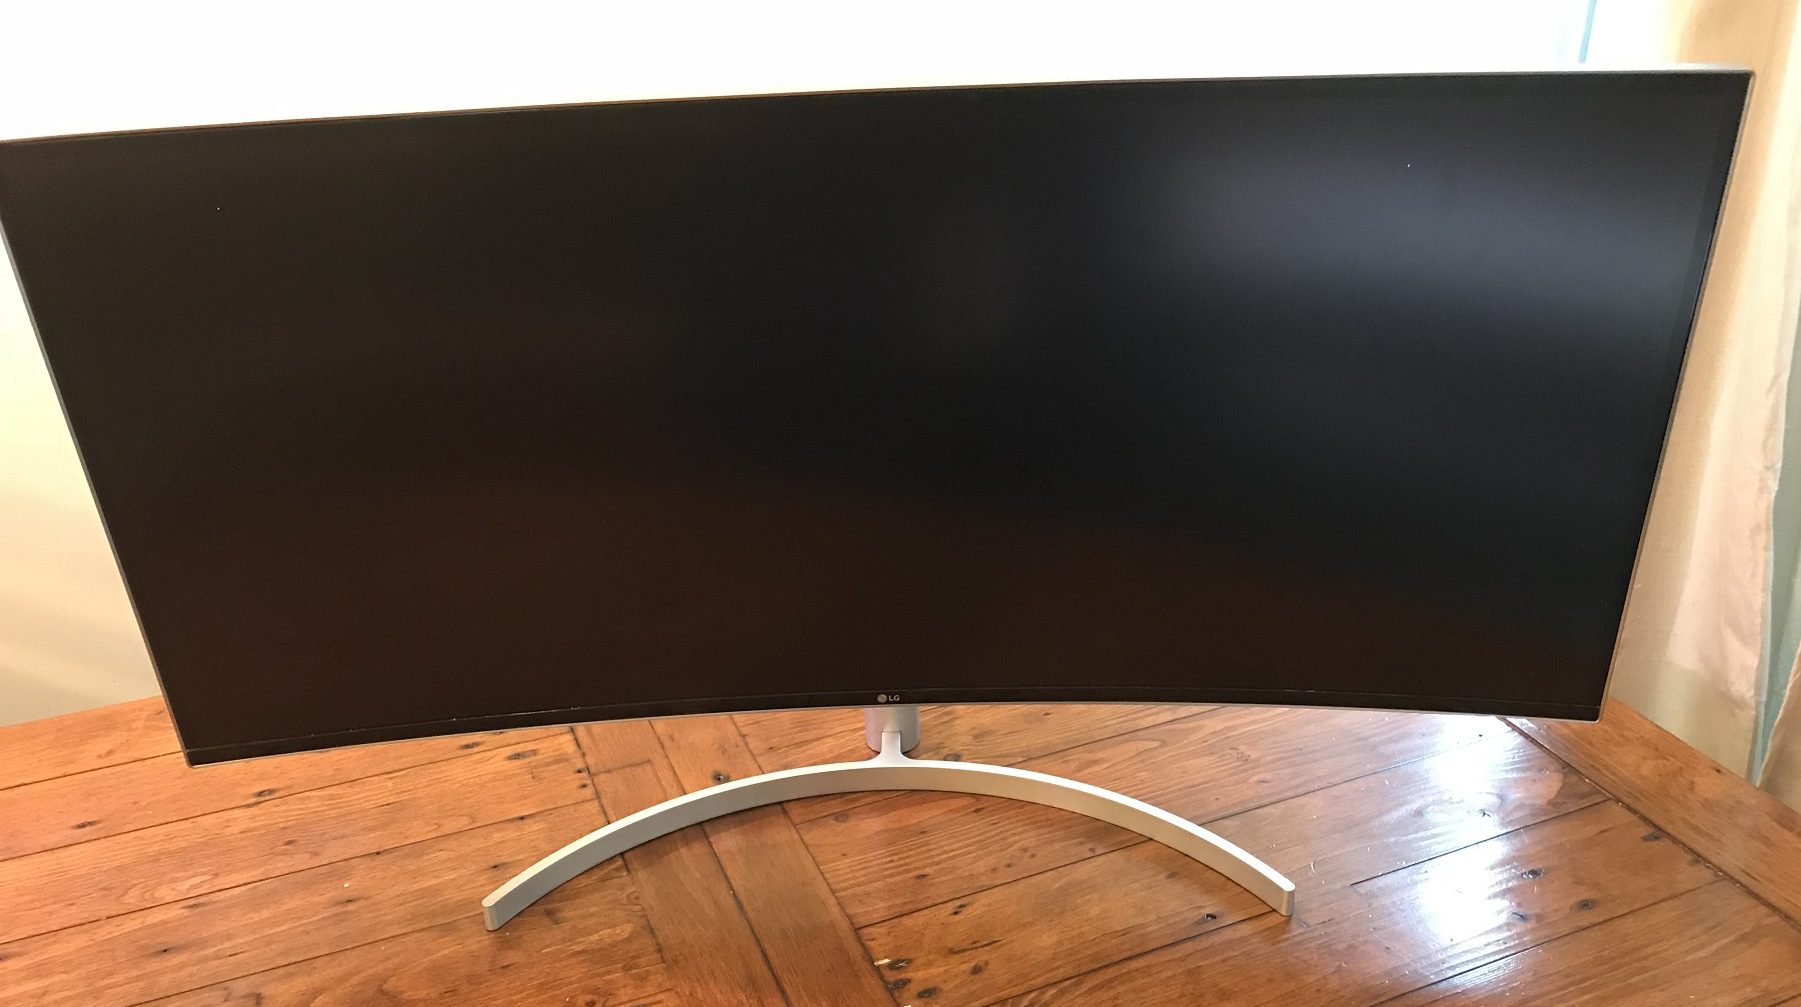 LG 38WK95C Curved 38” UltraWide Monitor - unboxed